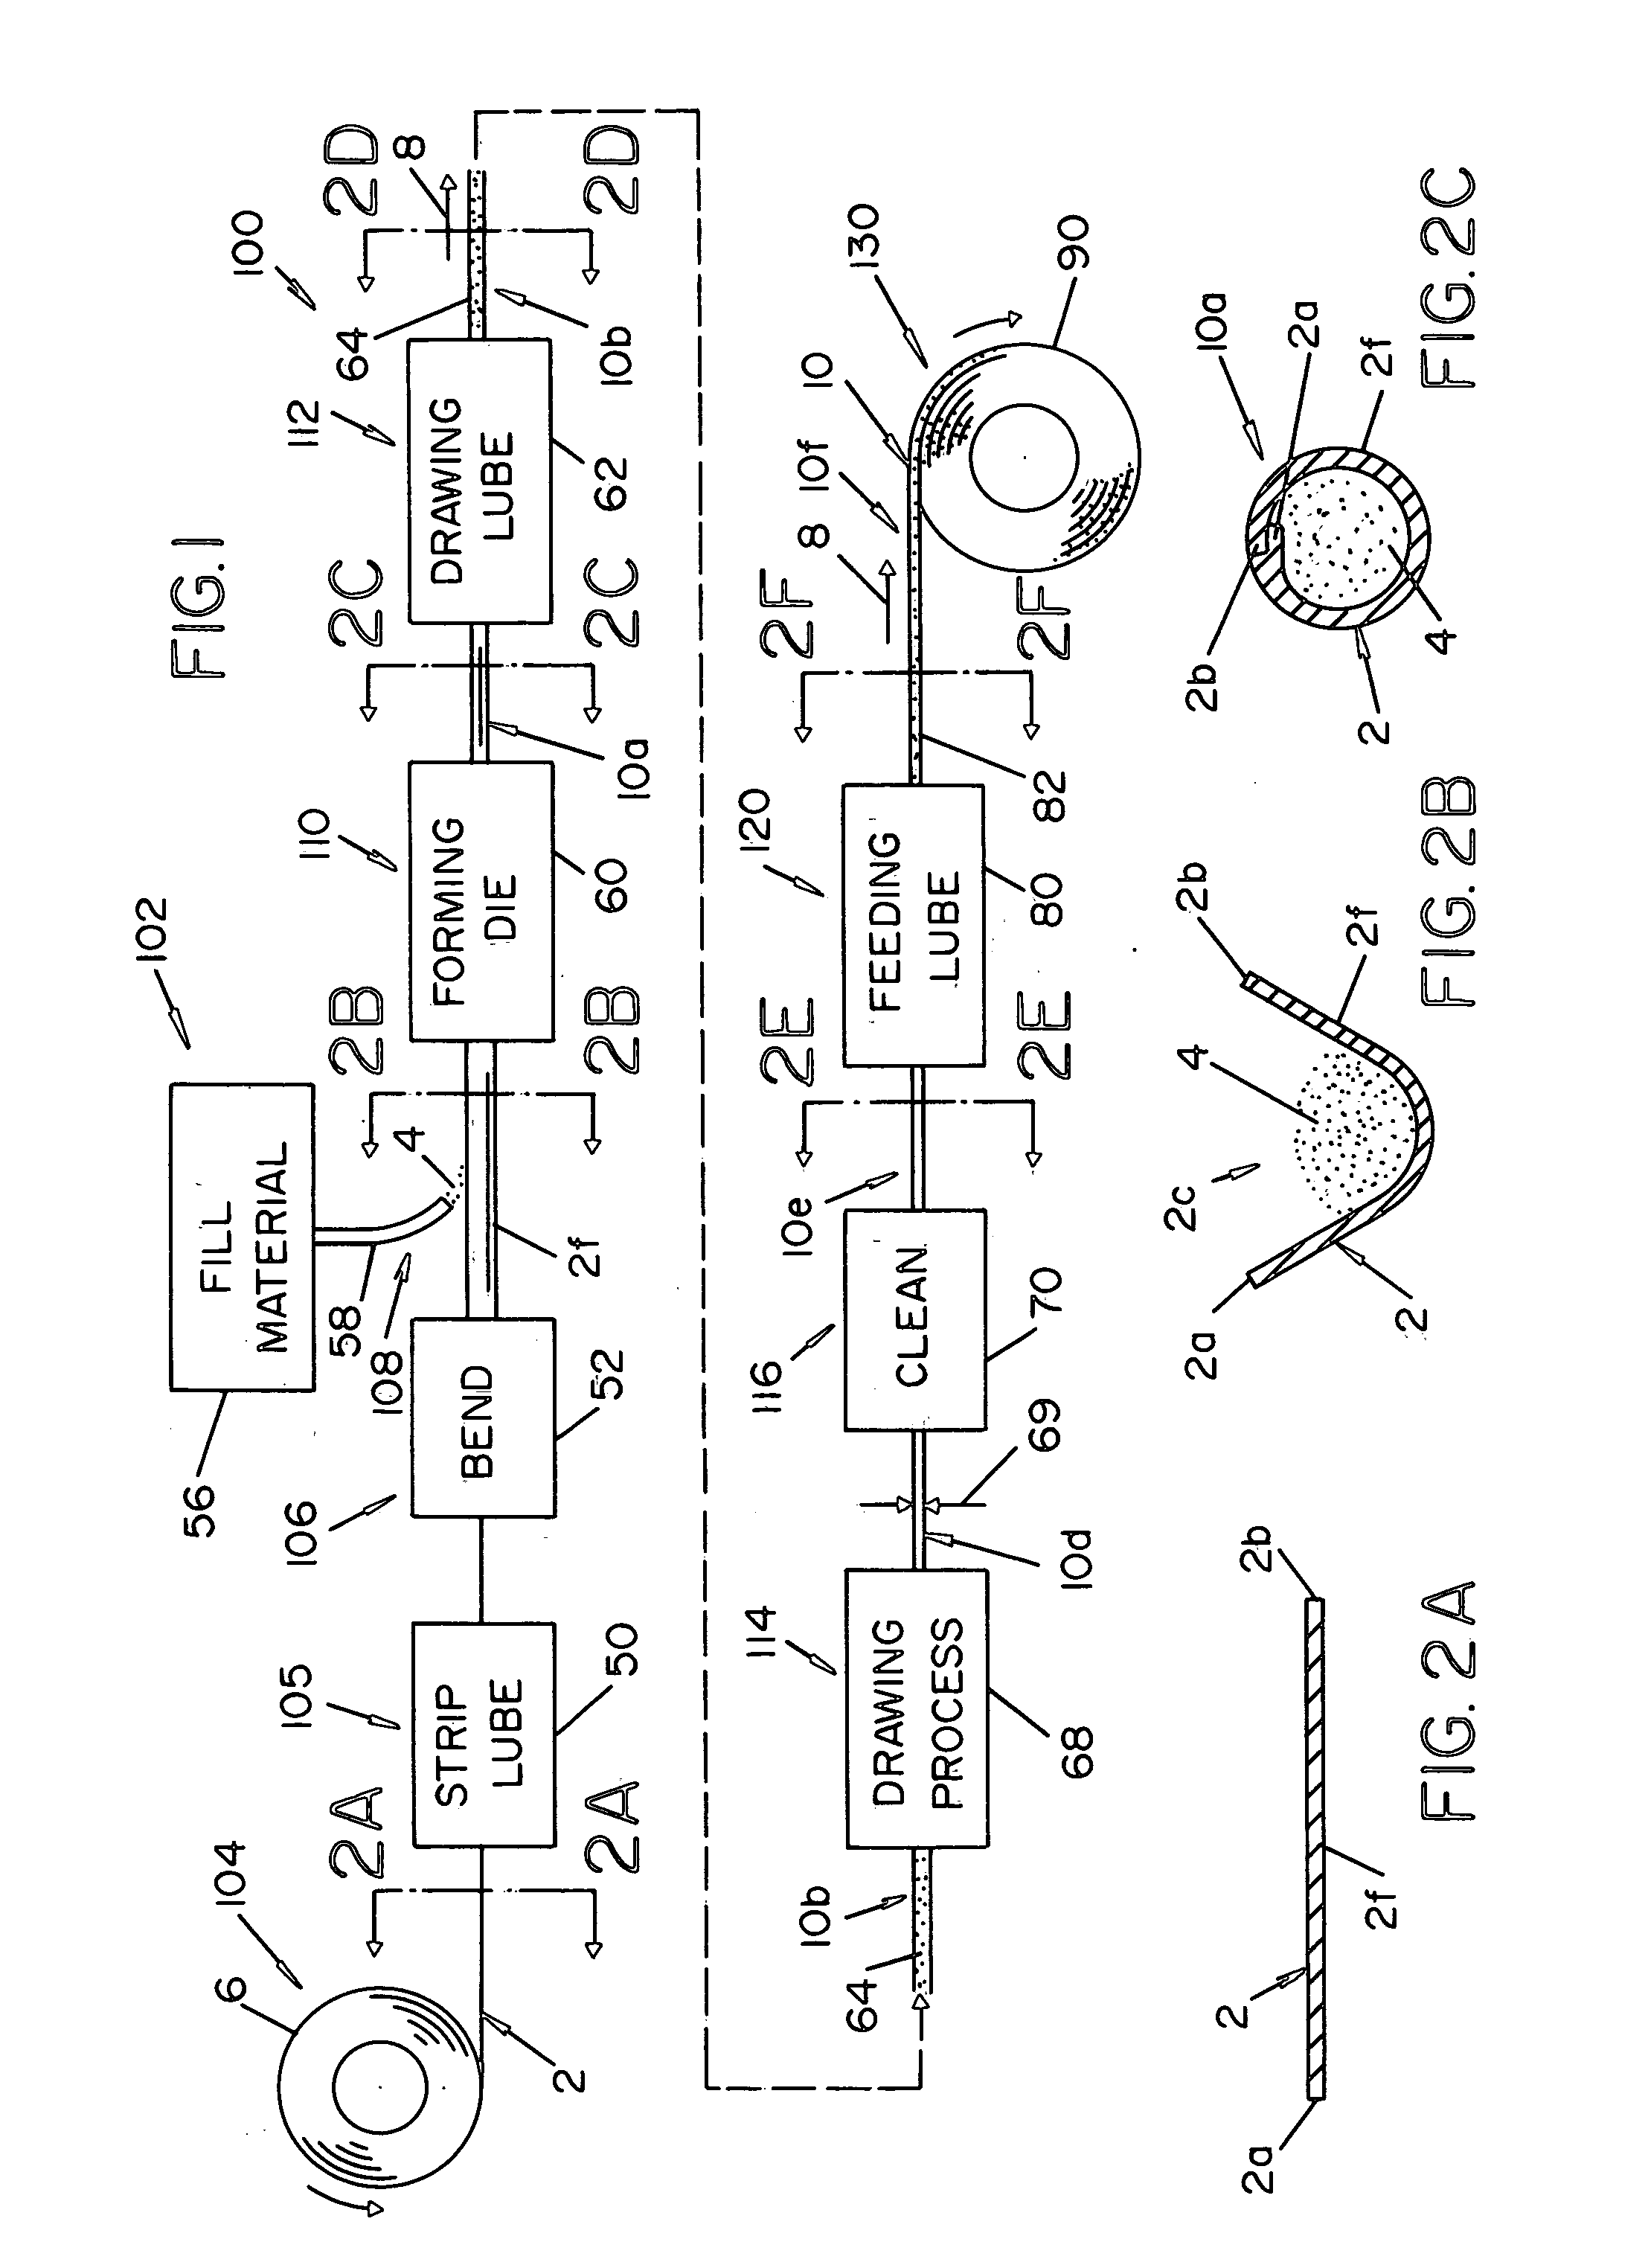 Cored welding electrode and methods for manufacturing the same